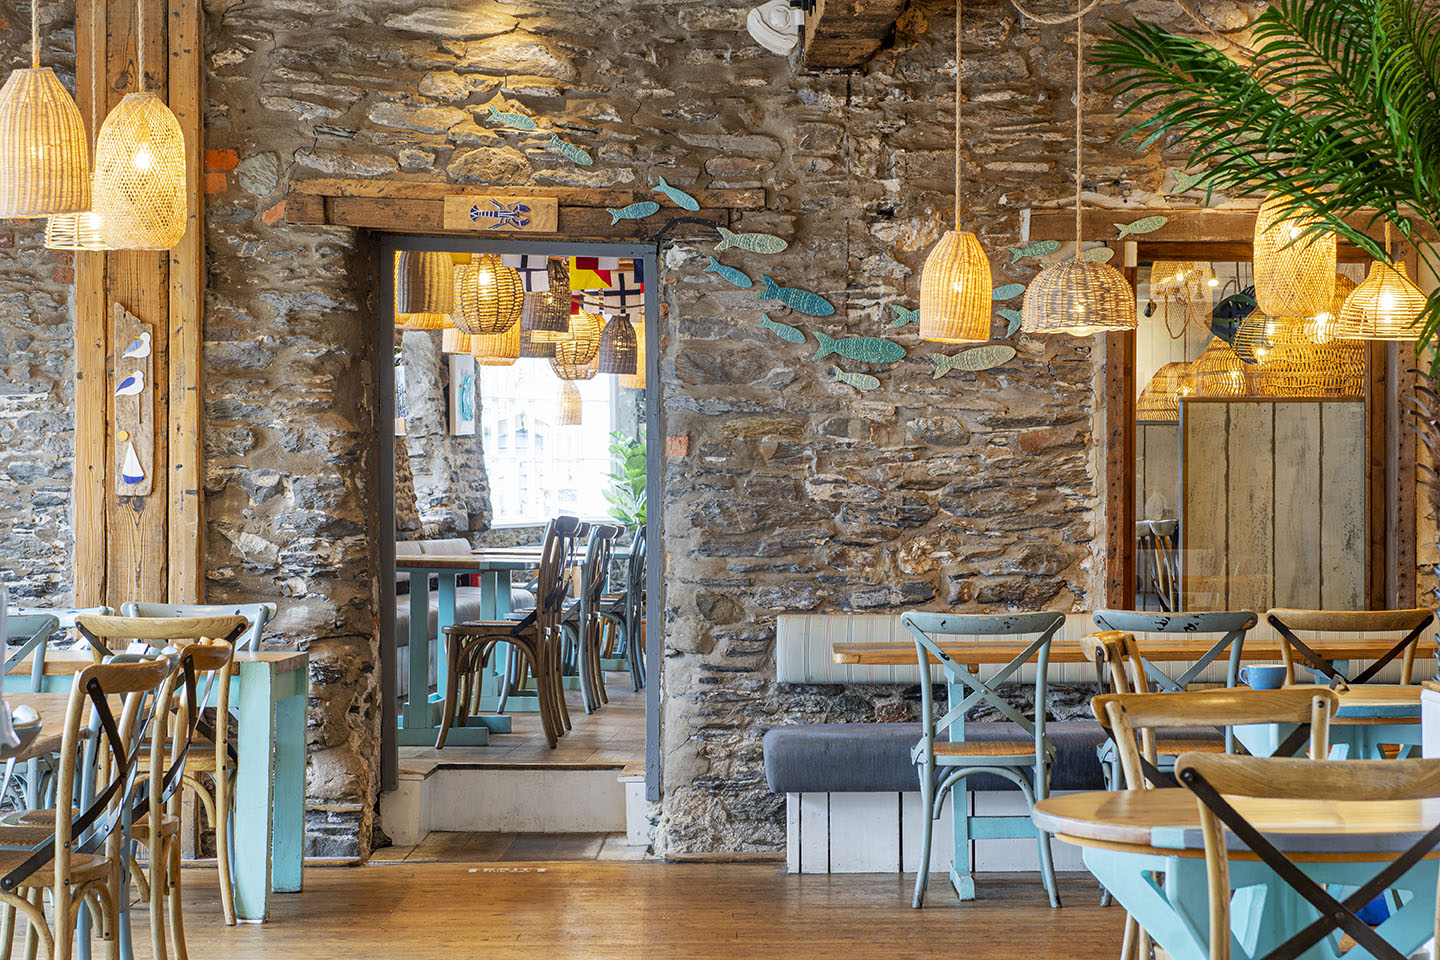 Interior of the Sharksfin restaurant in Mevagissey with straw lampshades and old stone wall